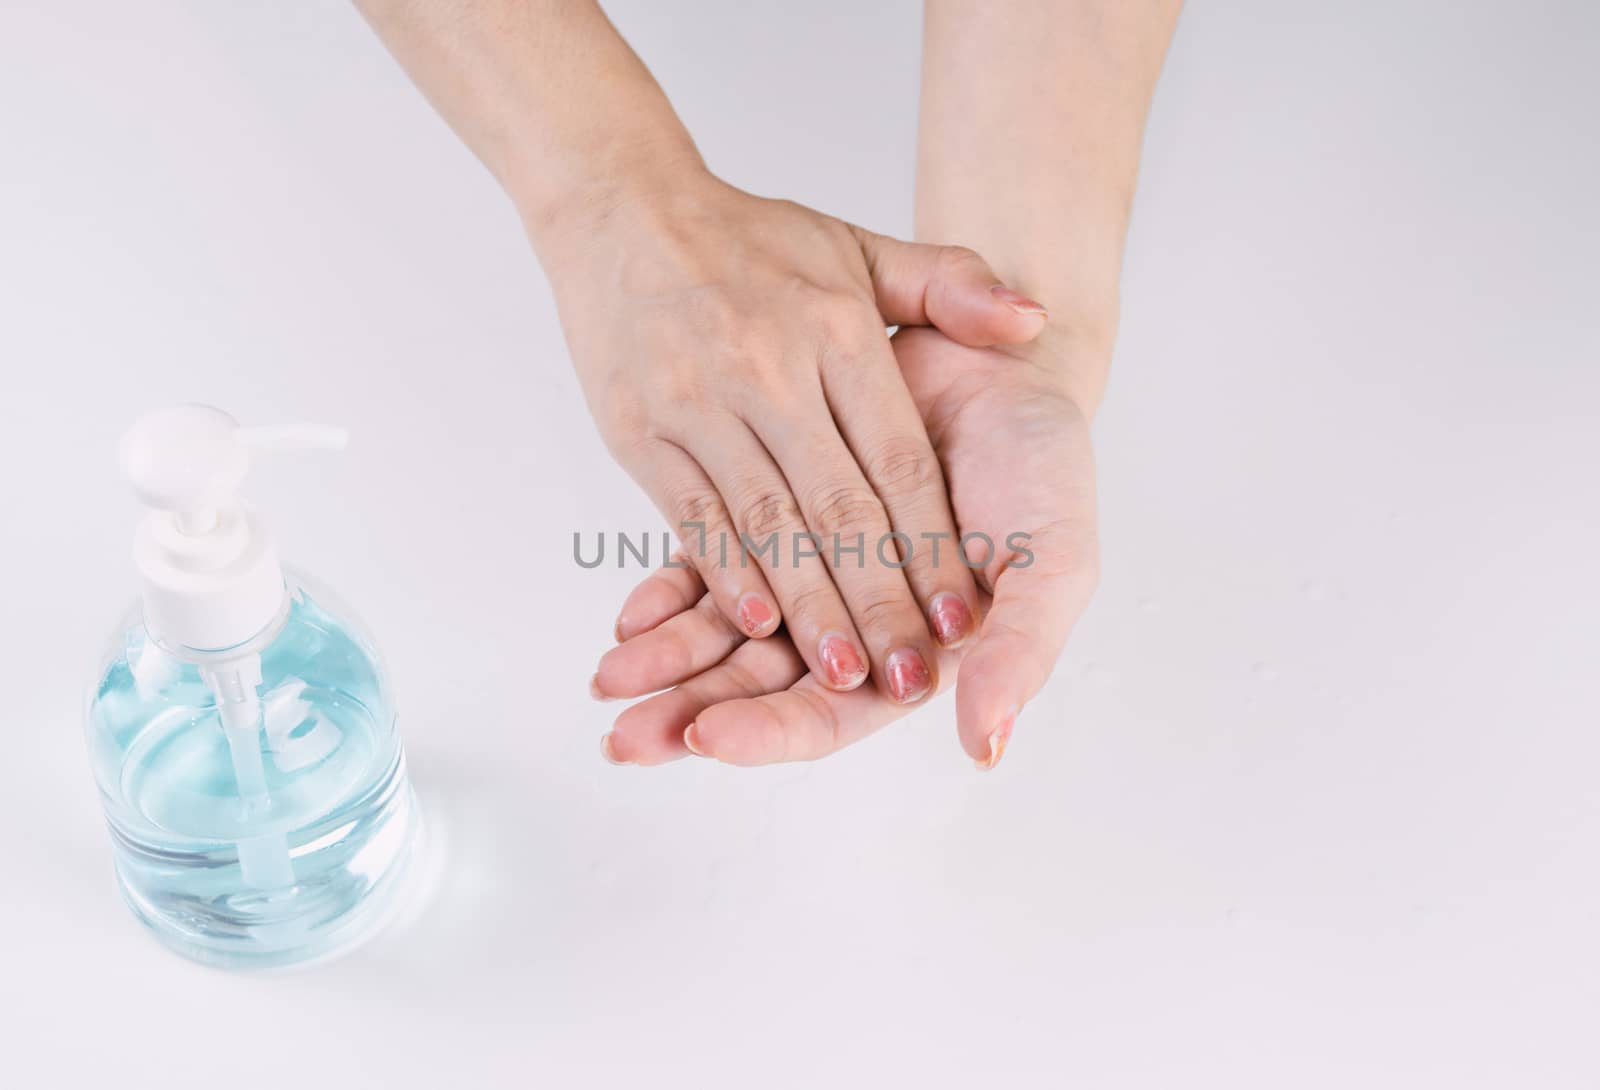 Washing hands alcohol keep clean destroy virus